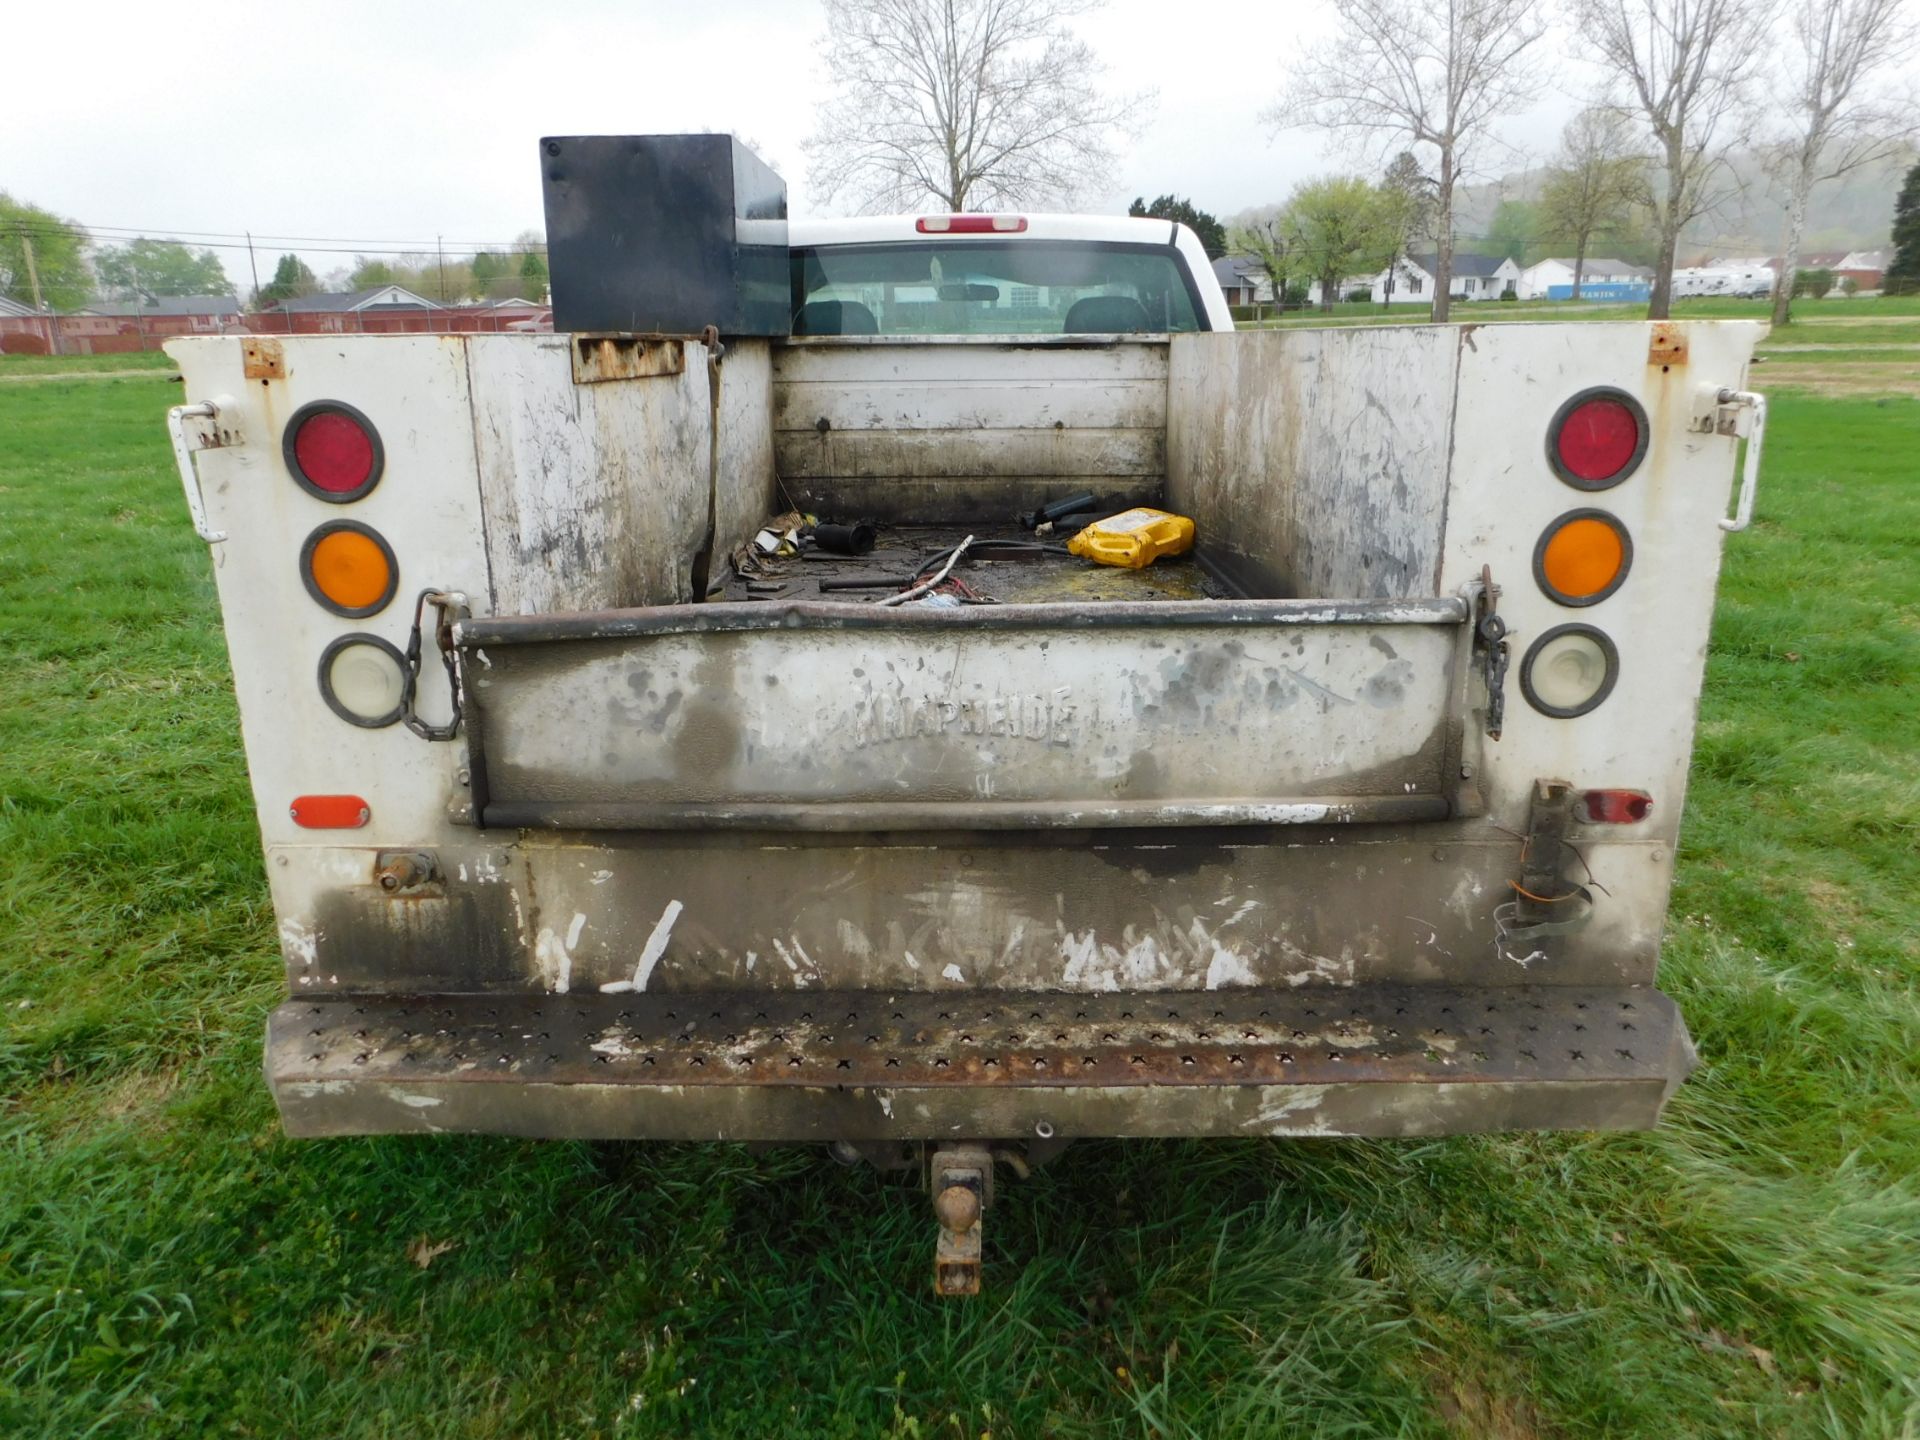 2002 Chevrolet 2500HD Service Truck, VIN 1GBHC24122E130607, Diesel, Automatic, AM/FM, AC, Regular - Image 6 of 23